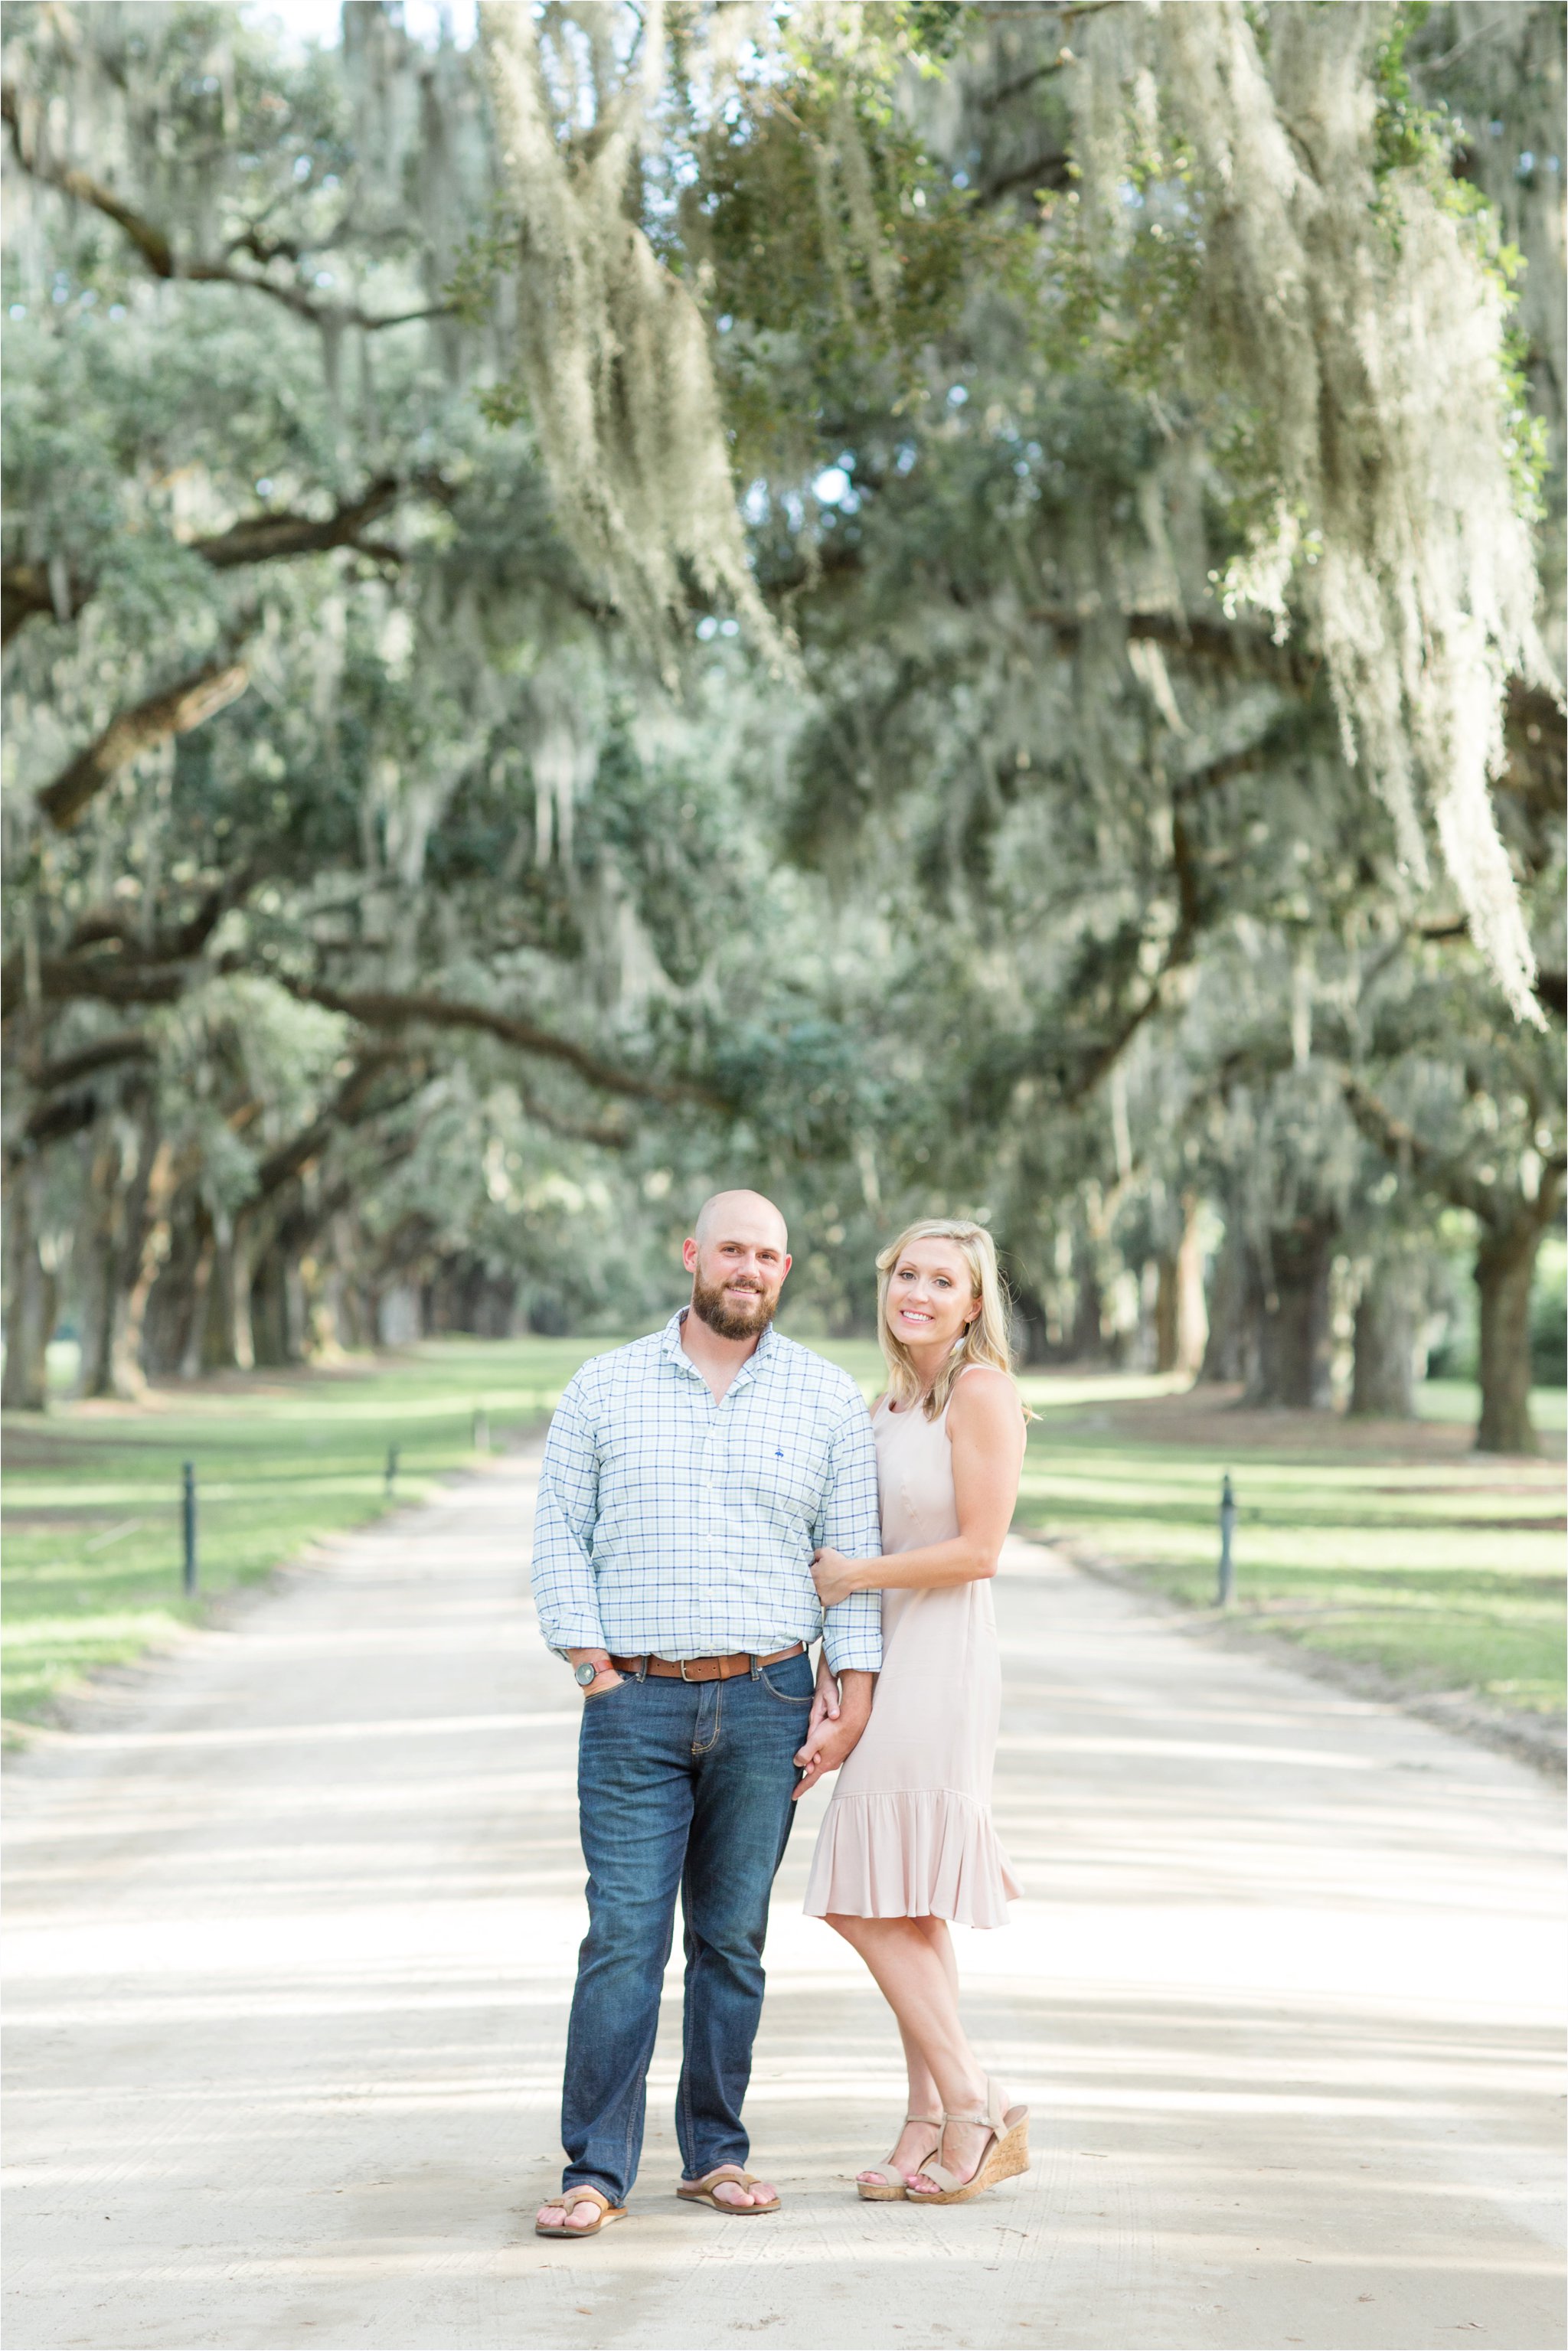 Boone Hall Engagement Session | Boone Hall Wedding Photographer | Charleston Wedding Photographer | Christa Rene Photography